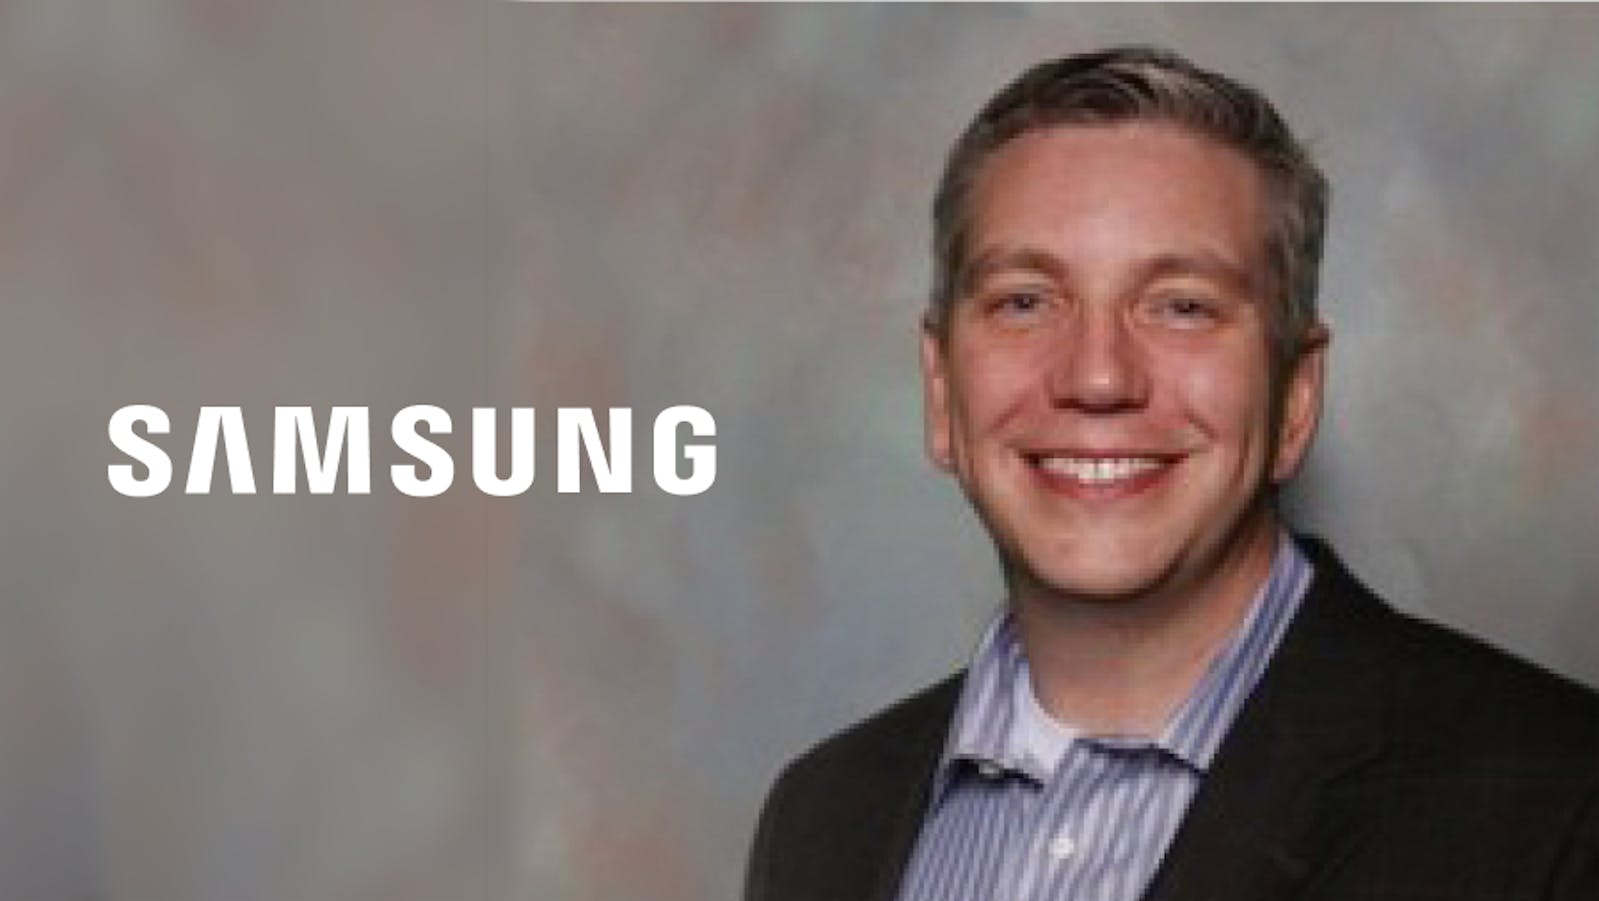 Ed Billmaier, Samsung US: From last year to this year, we’ve grown sales by 10x